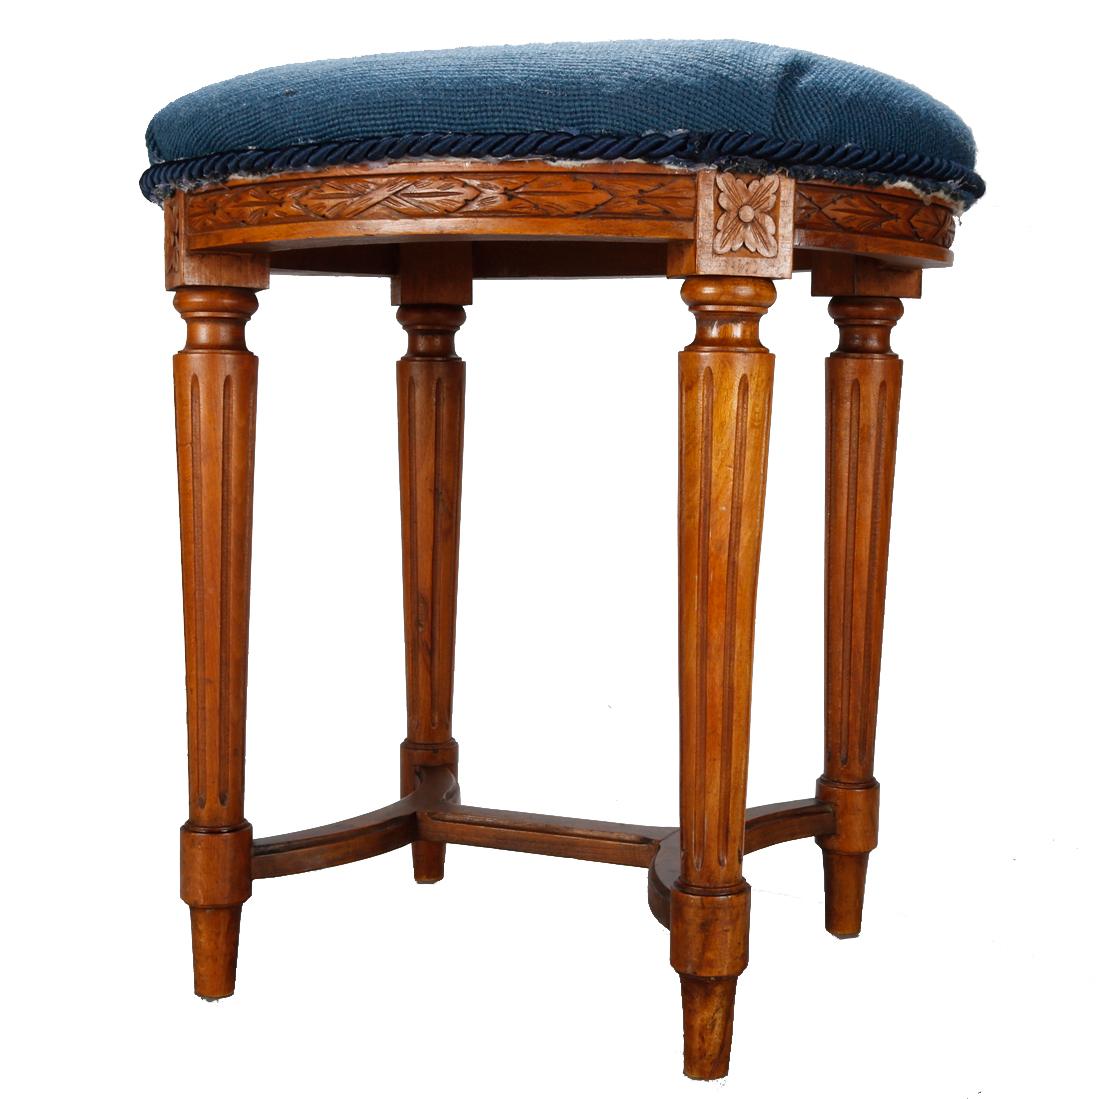 An antique French Louis XVI stool offers floral needlepoint upholstered seat surmounting fruitwood base with carved foliate and rosette elements, raised on tapered and fluted legs having stylized stretcher, 19th century

Measures: 18.5